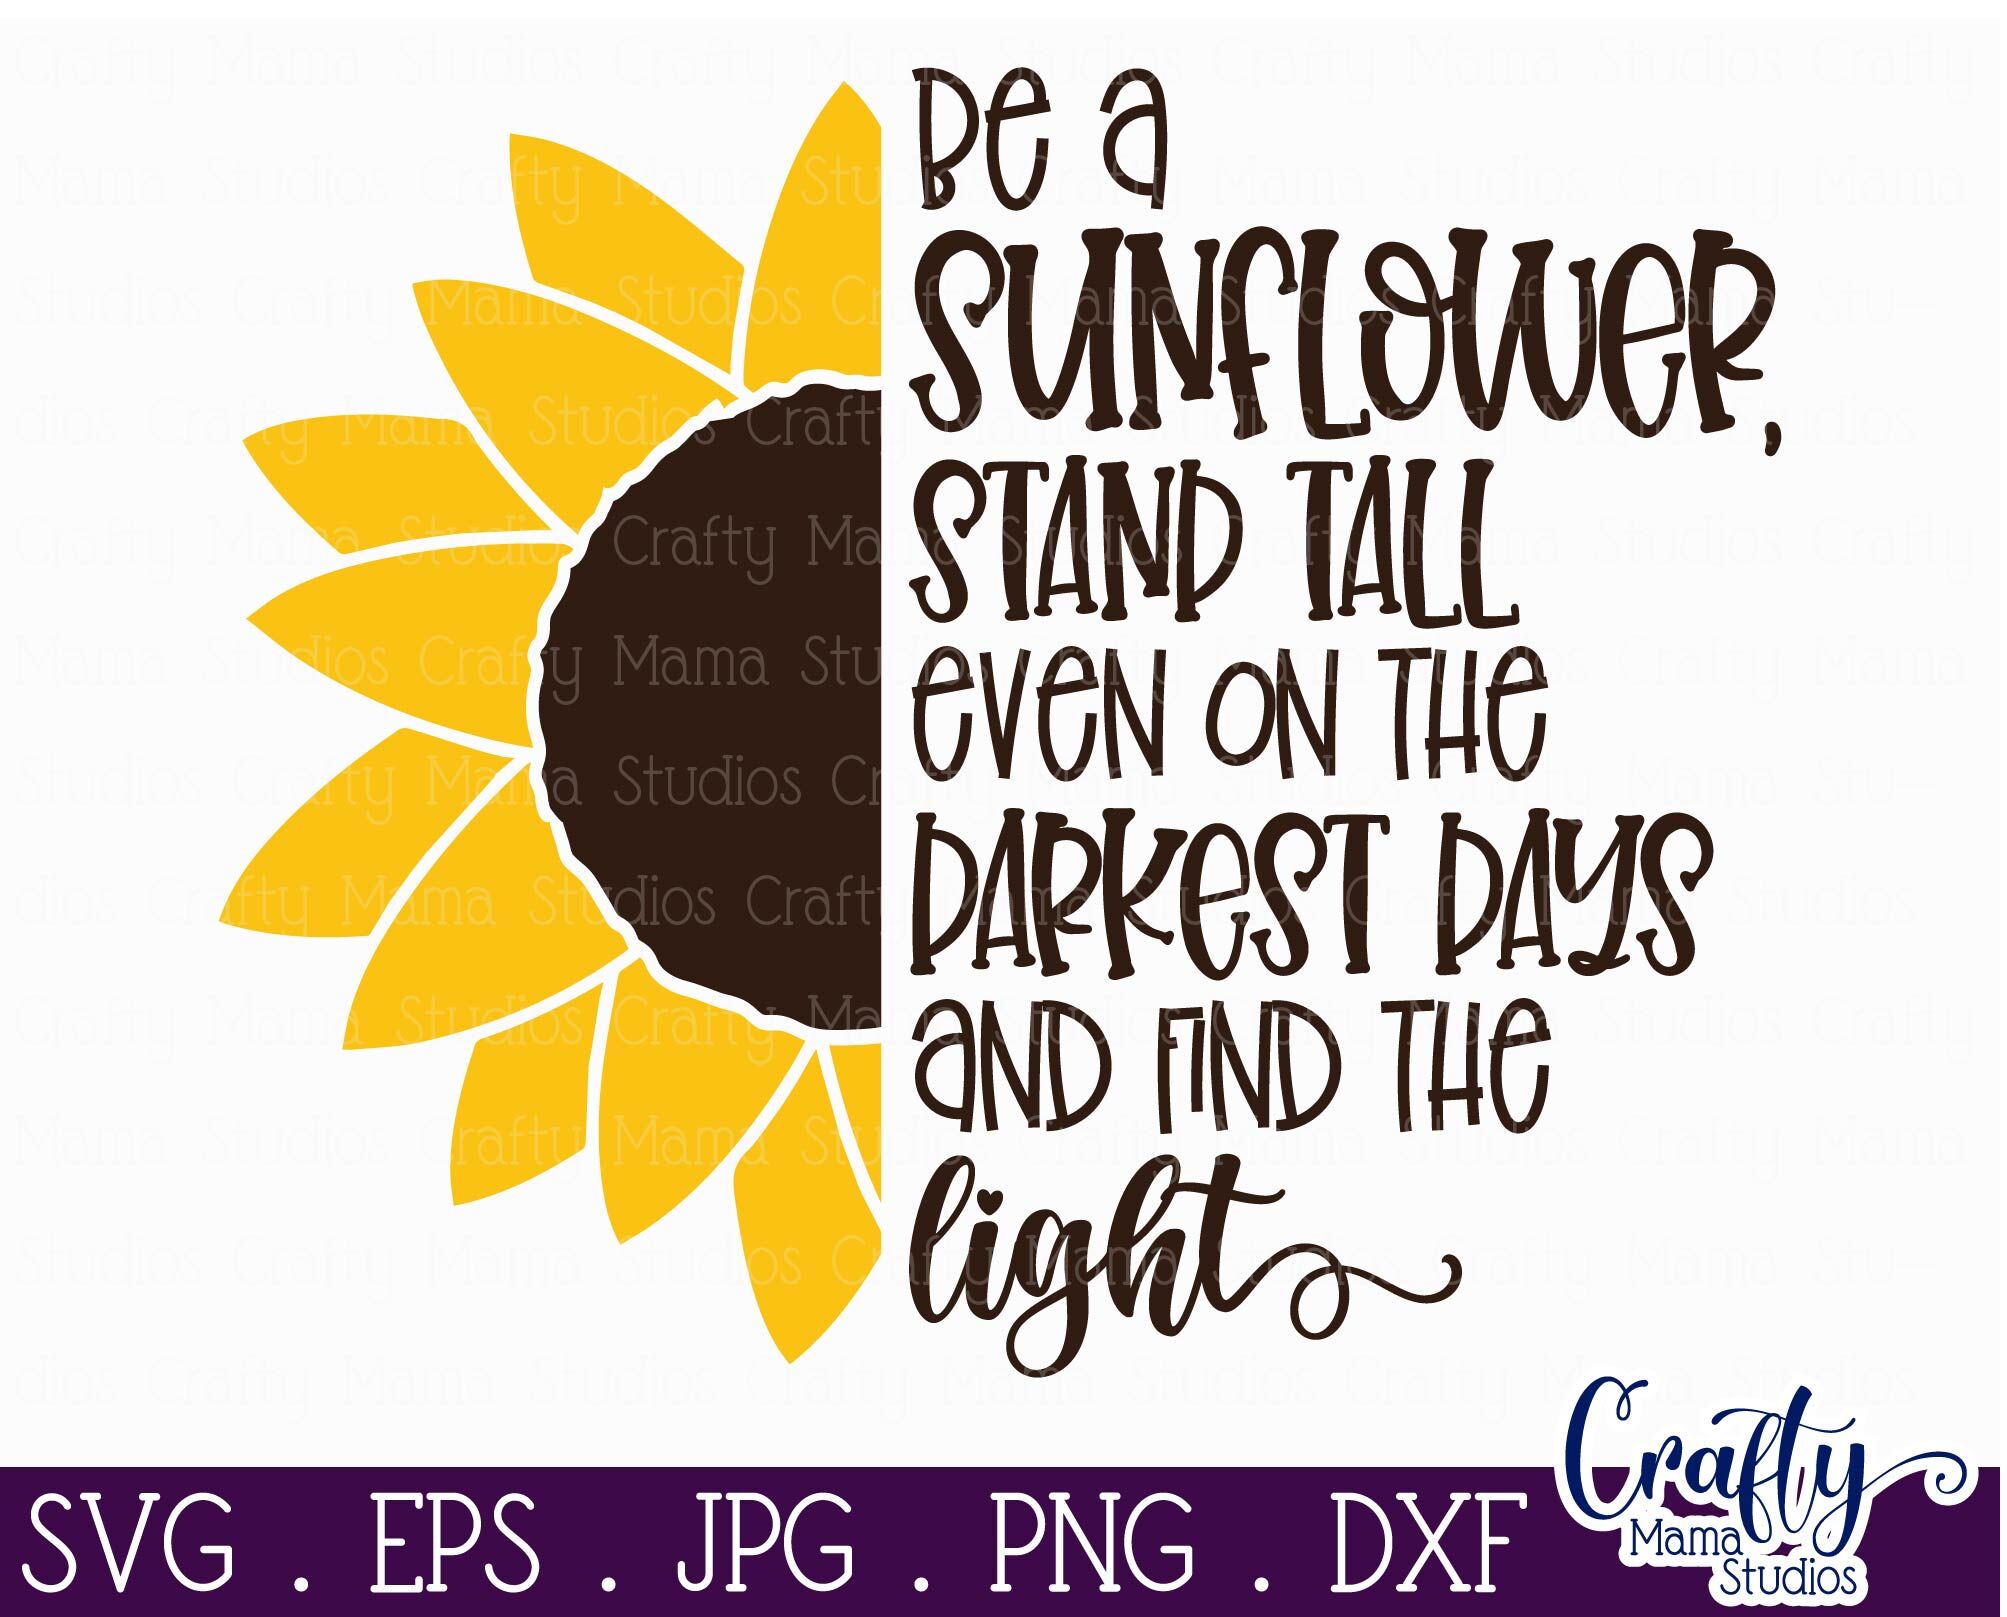 Sunflower Svg, Sunflower Quote, Be A Sunflower Stand Tall By Crafty